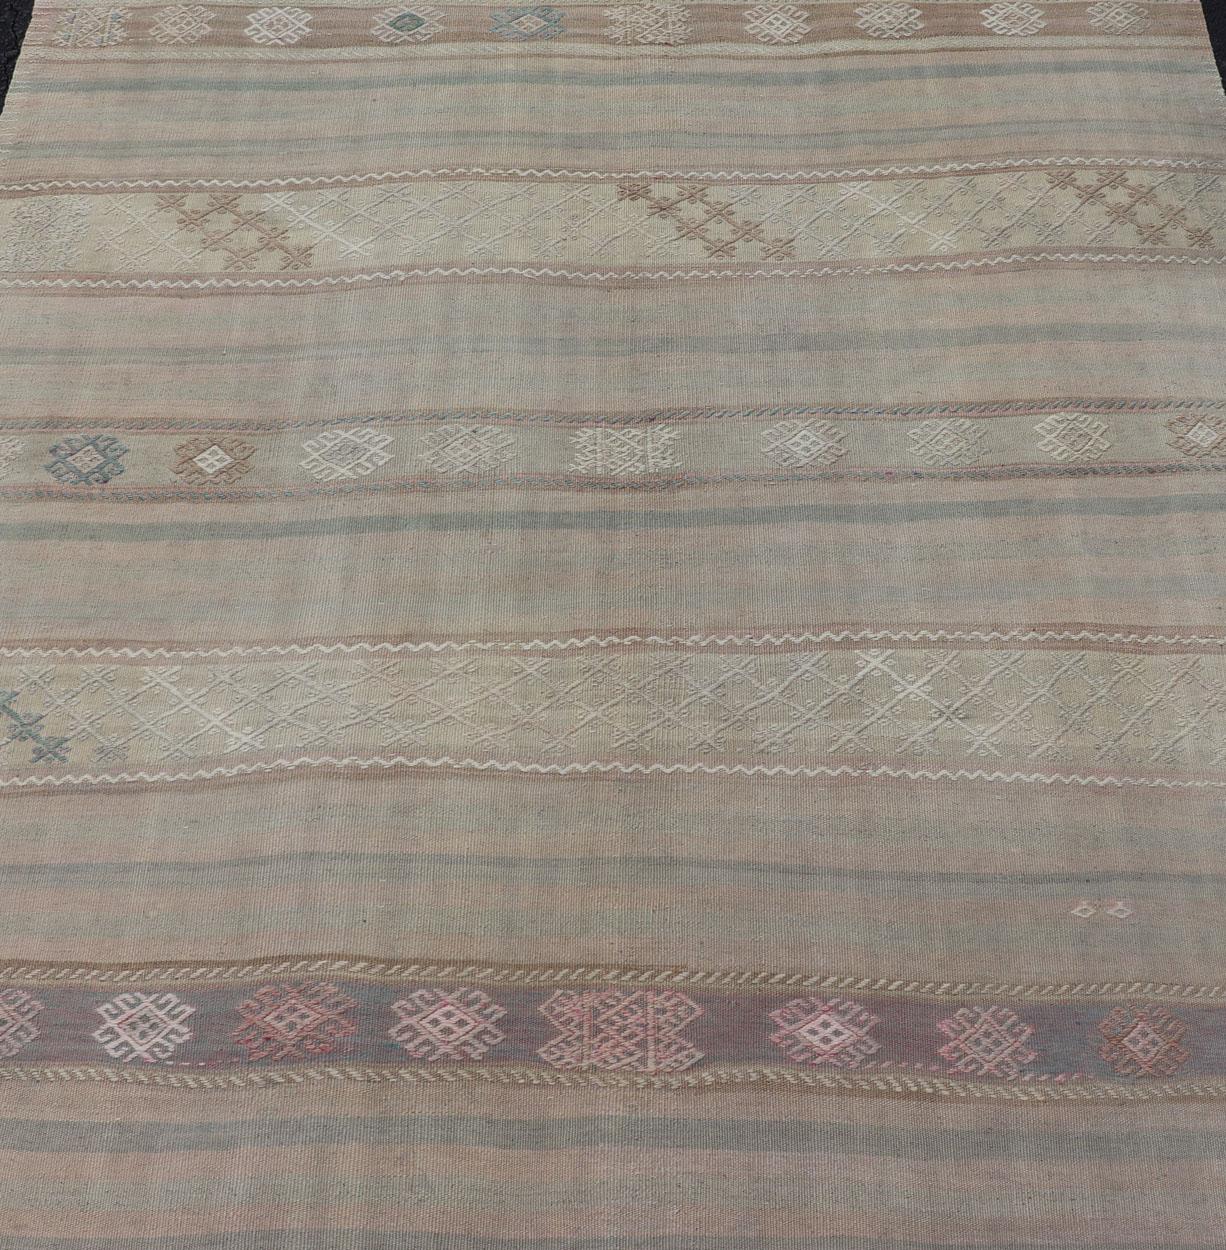 Hand-Woven Flat-Weave Turkish Kilim with Embroideries in Earthy Tones and Hints of Pink For Sale